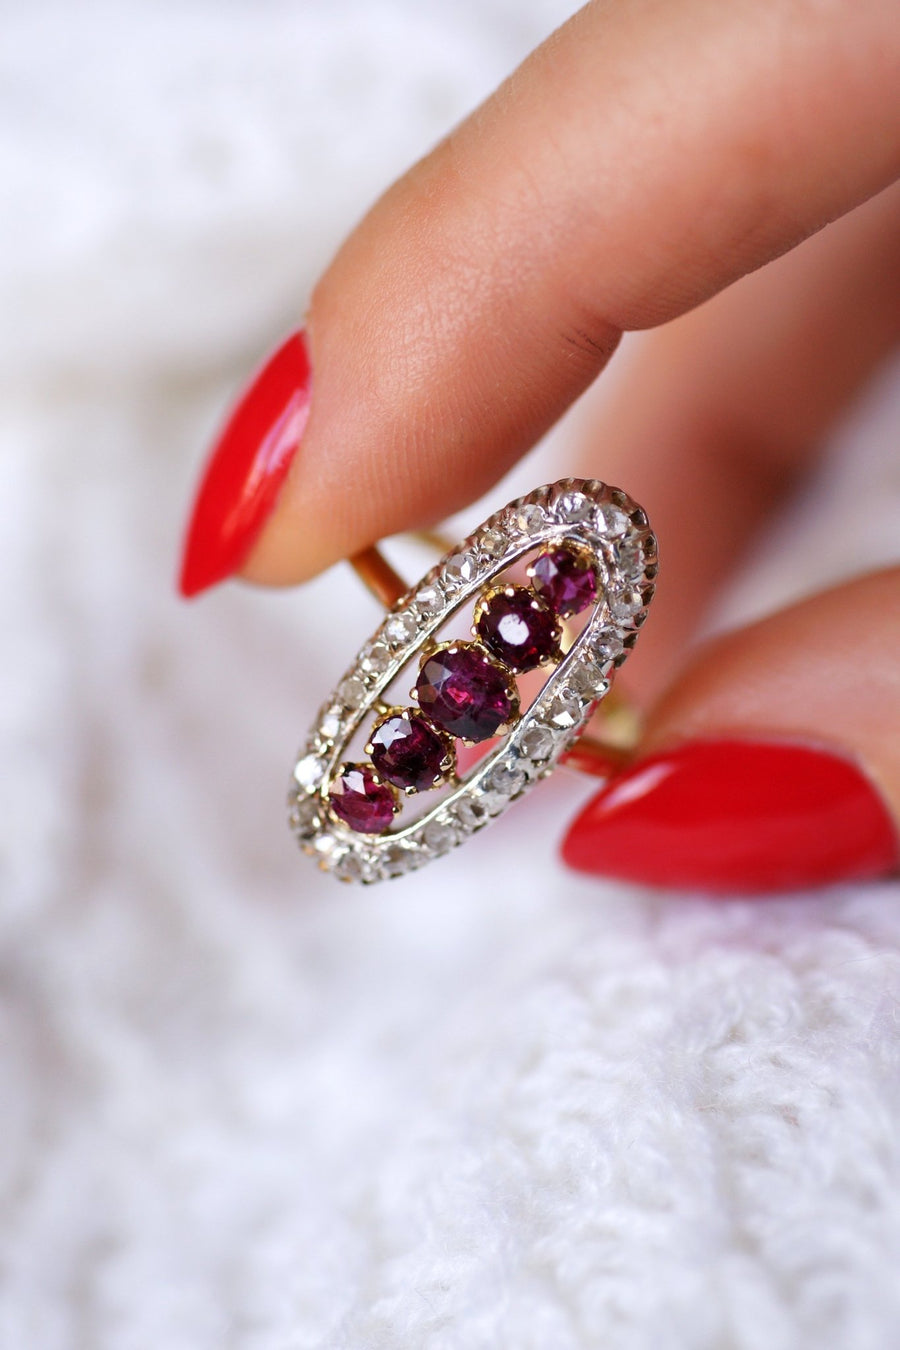 Antique marquise ring with diamonds and rubies in gold and silver - Galerie Pénélope